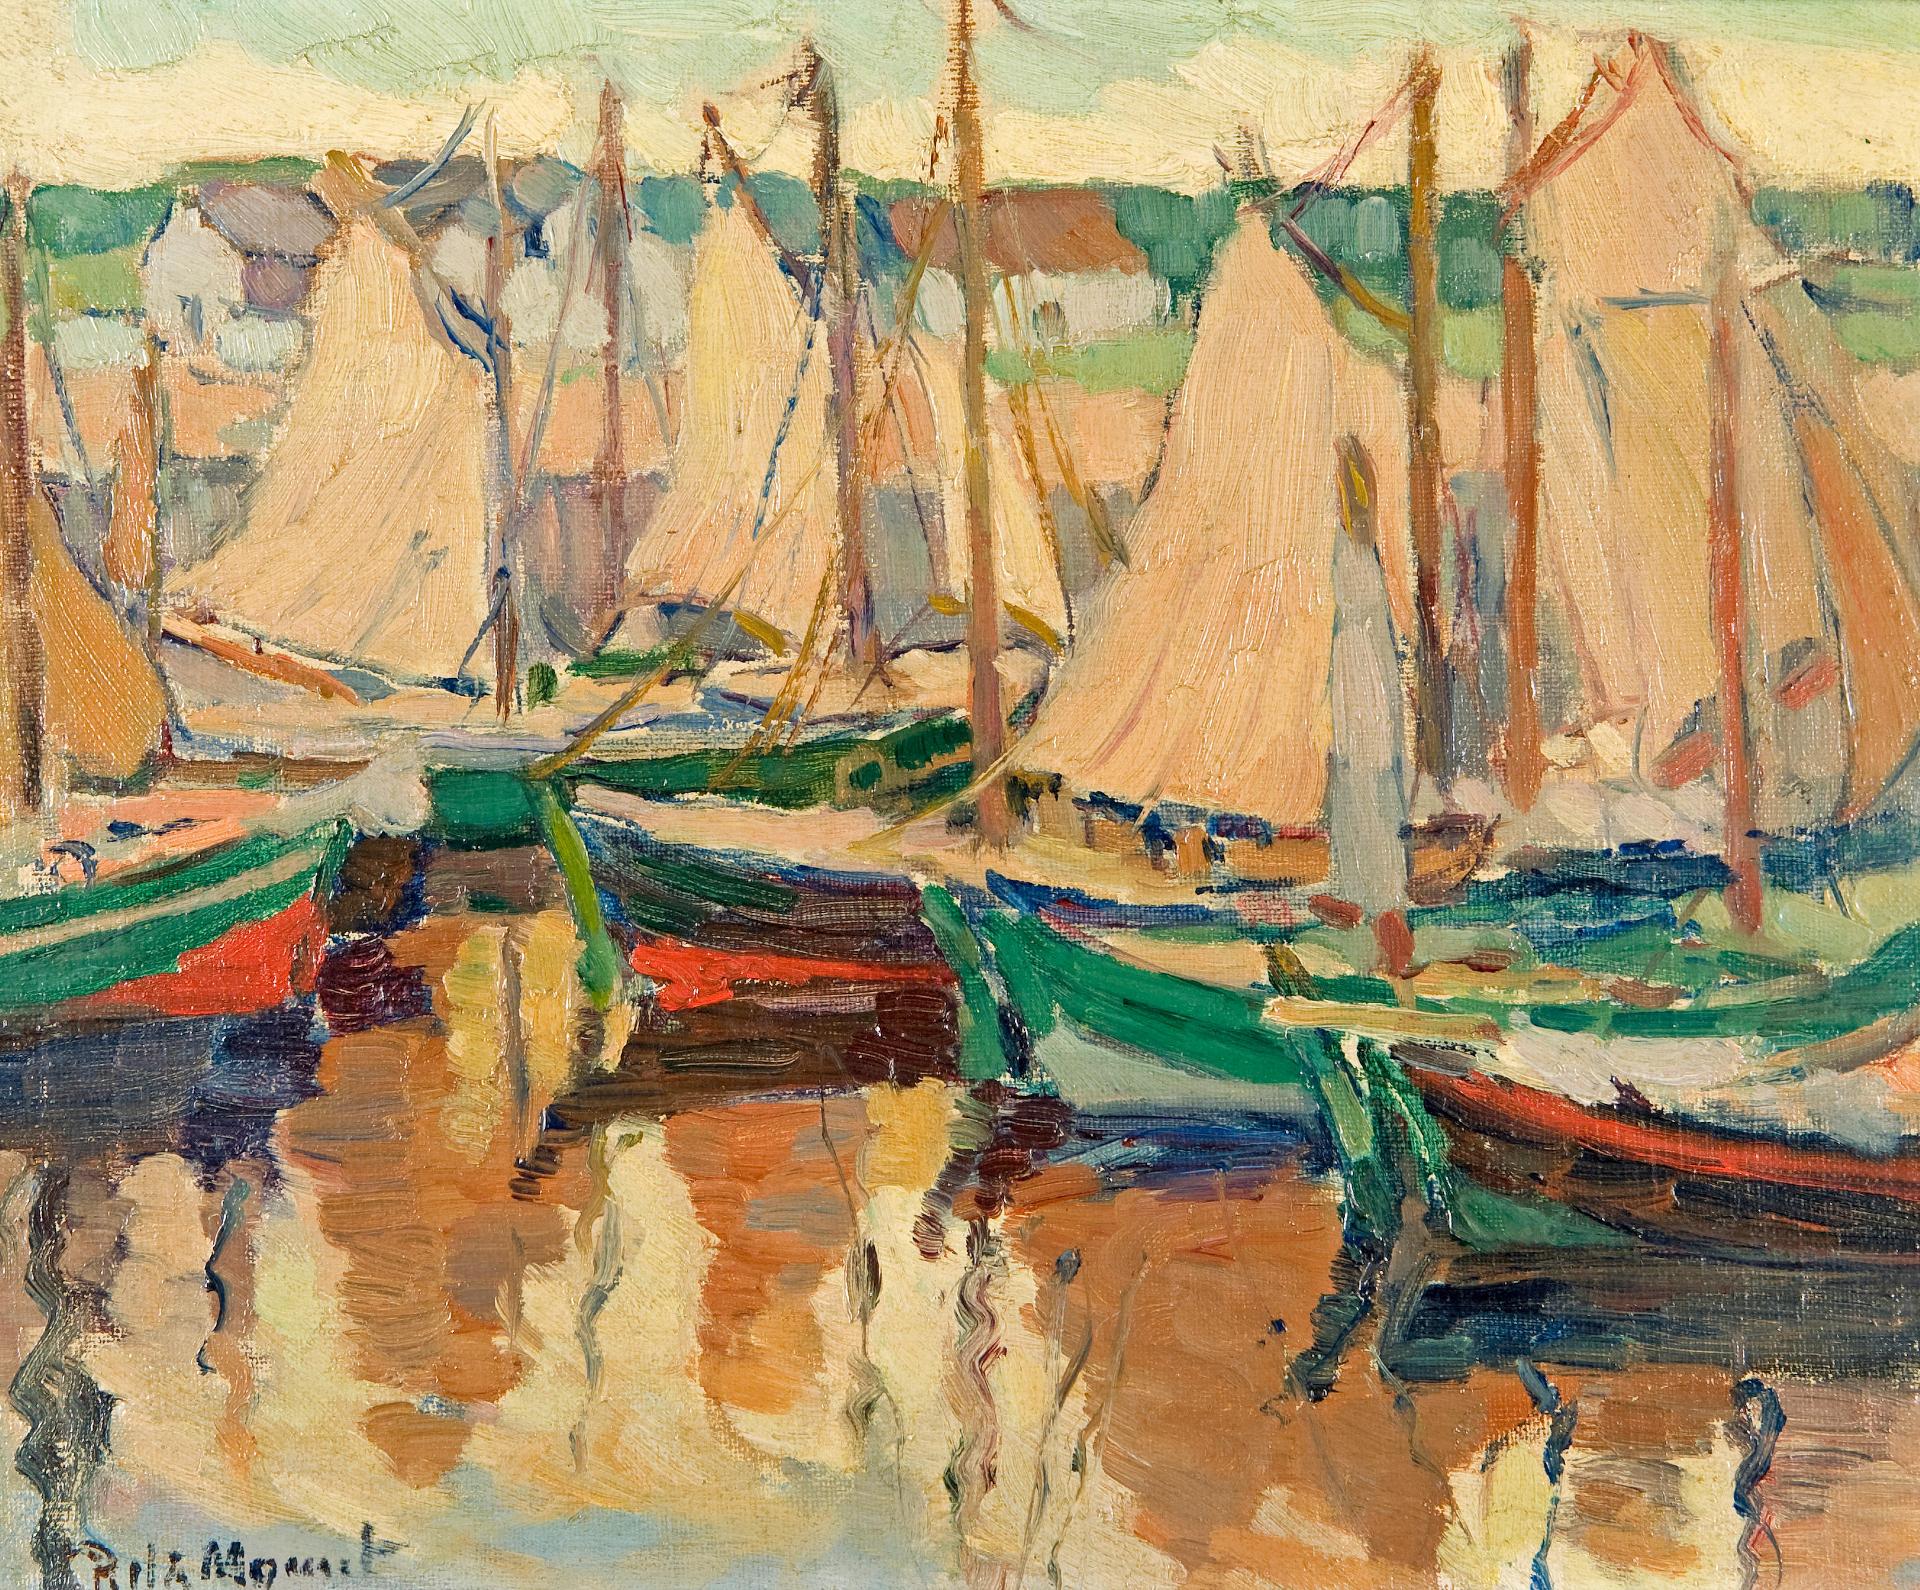 Rita Mount (1888-1967) - Fishing boats in the Harbour